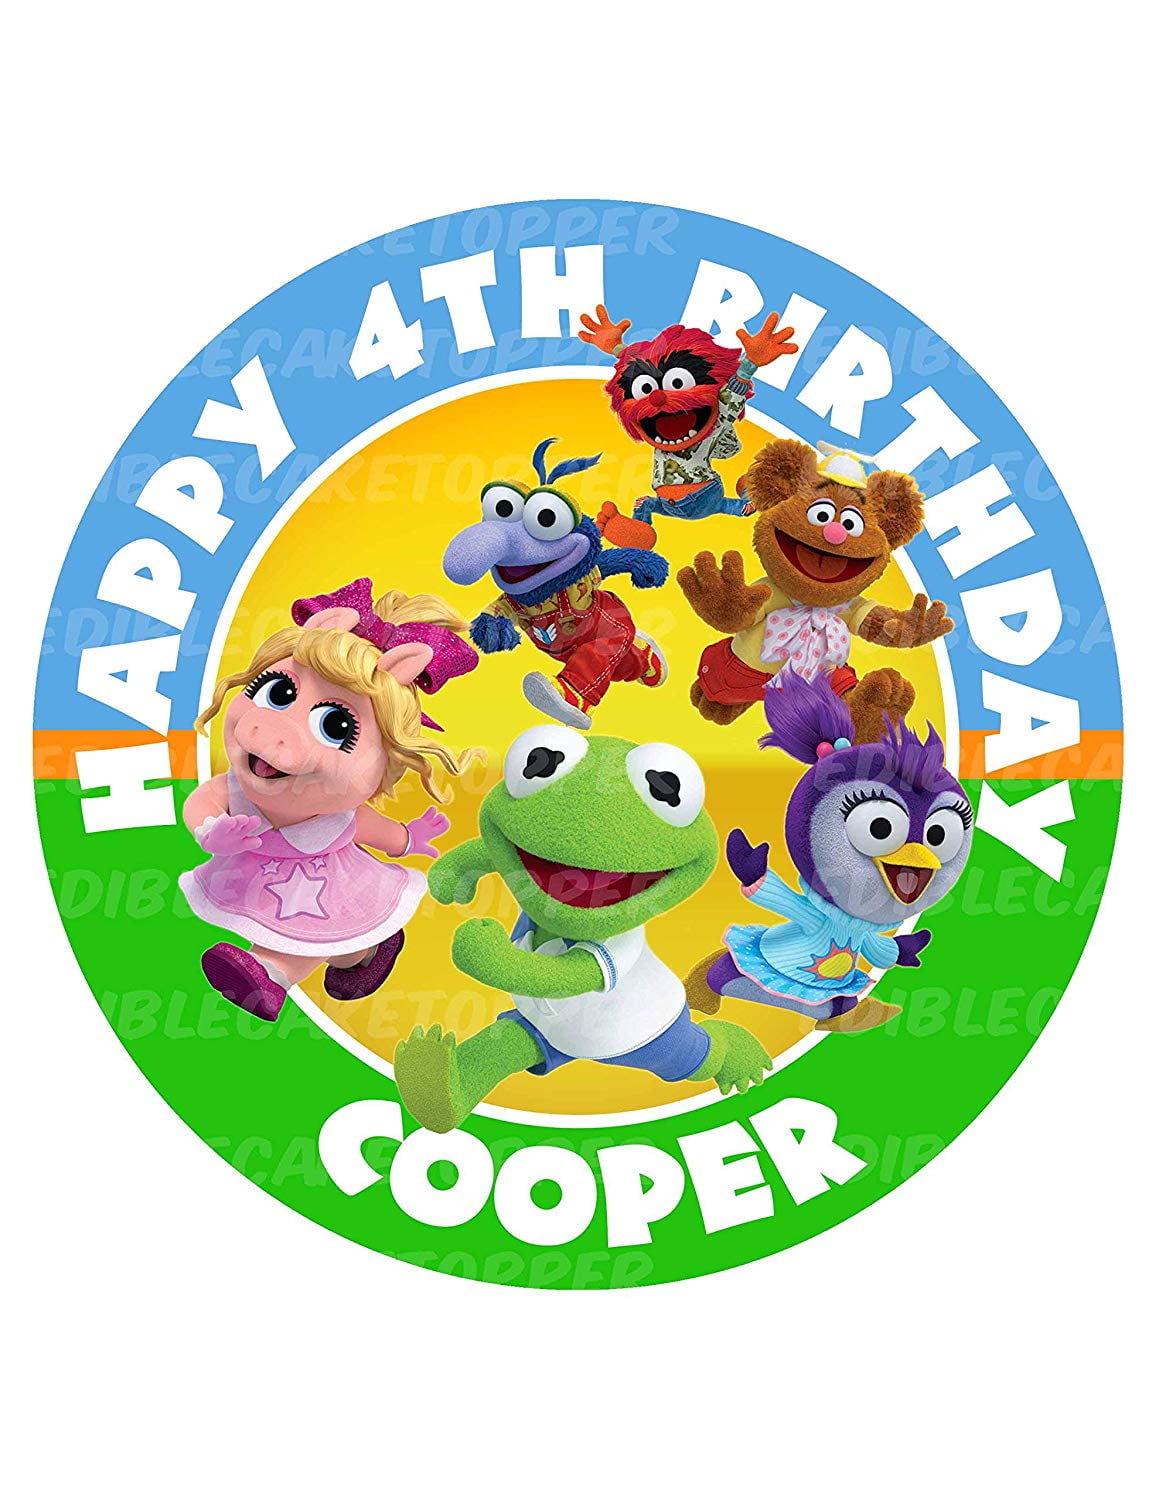 MUPPET BABIES  8" ROUND ICING CAKE TOPPER